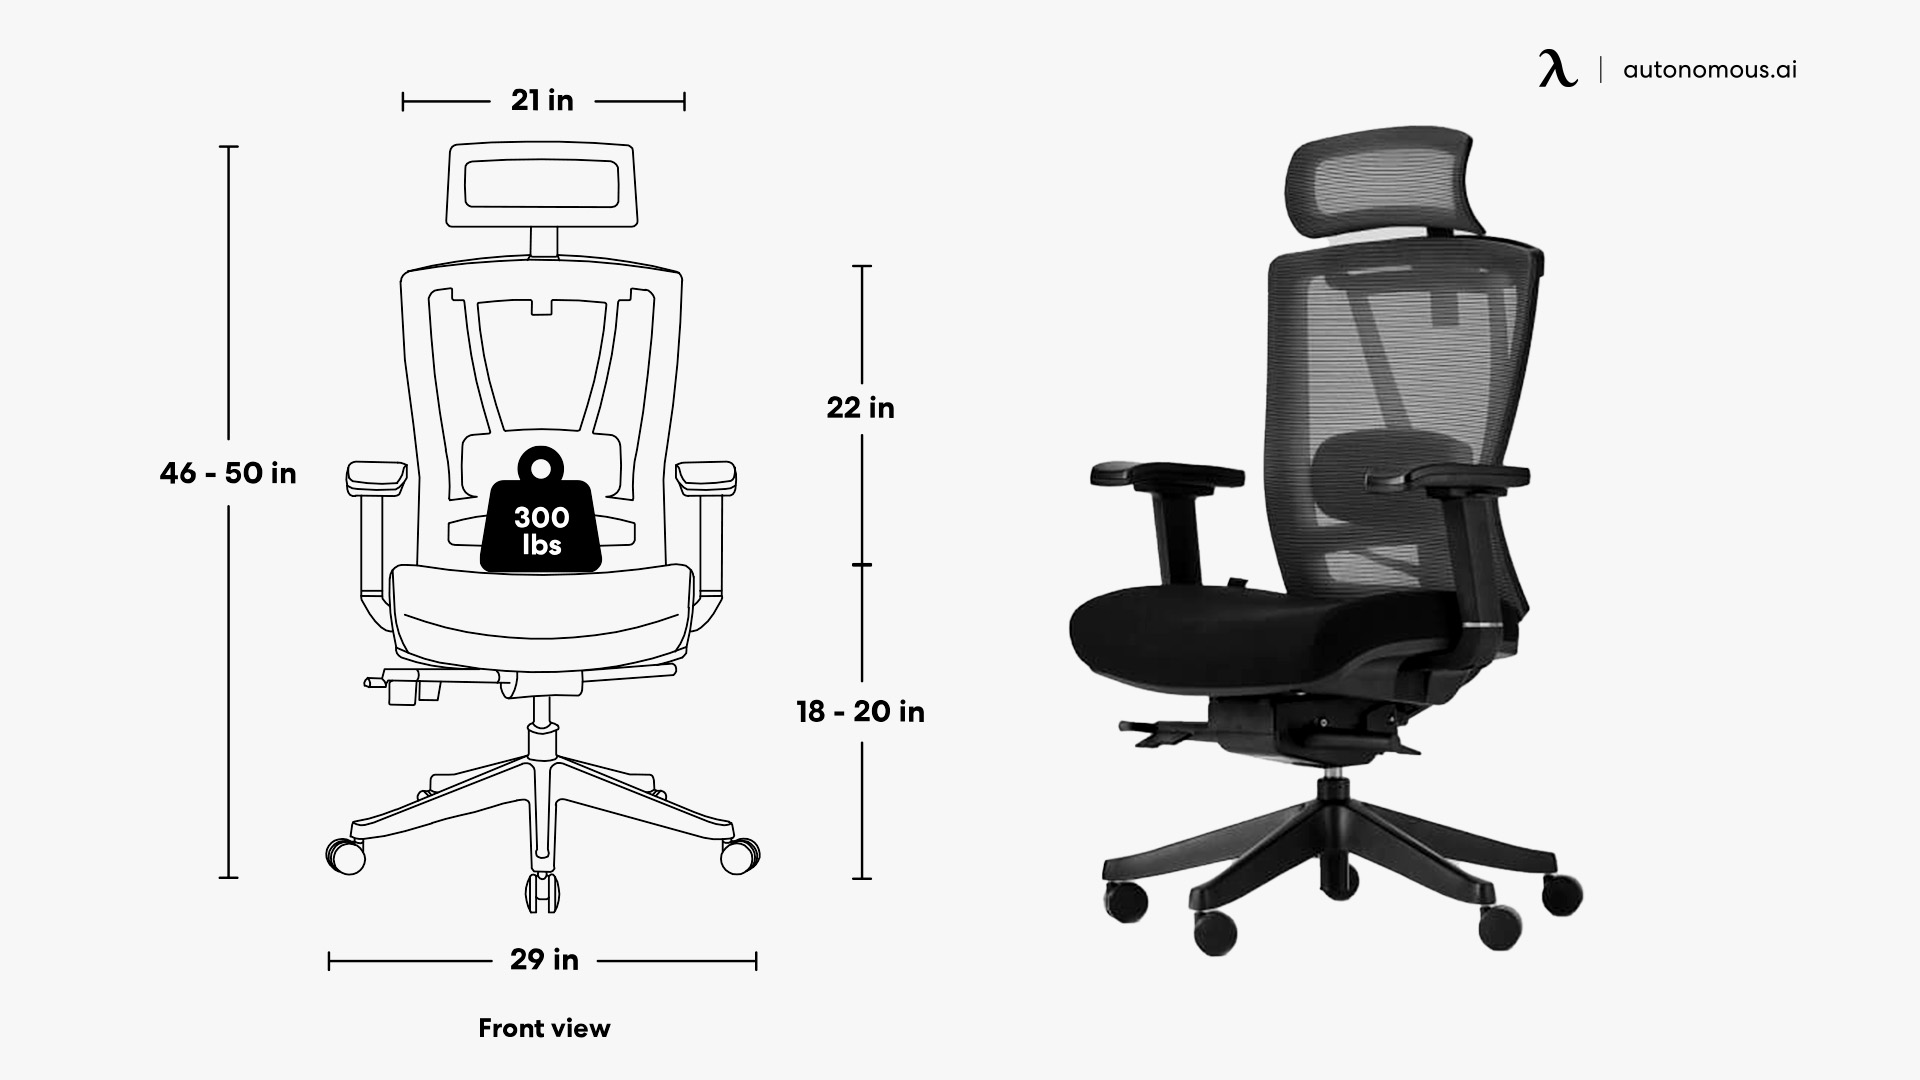 Standard Desk Chair Dimensions for Big Guys